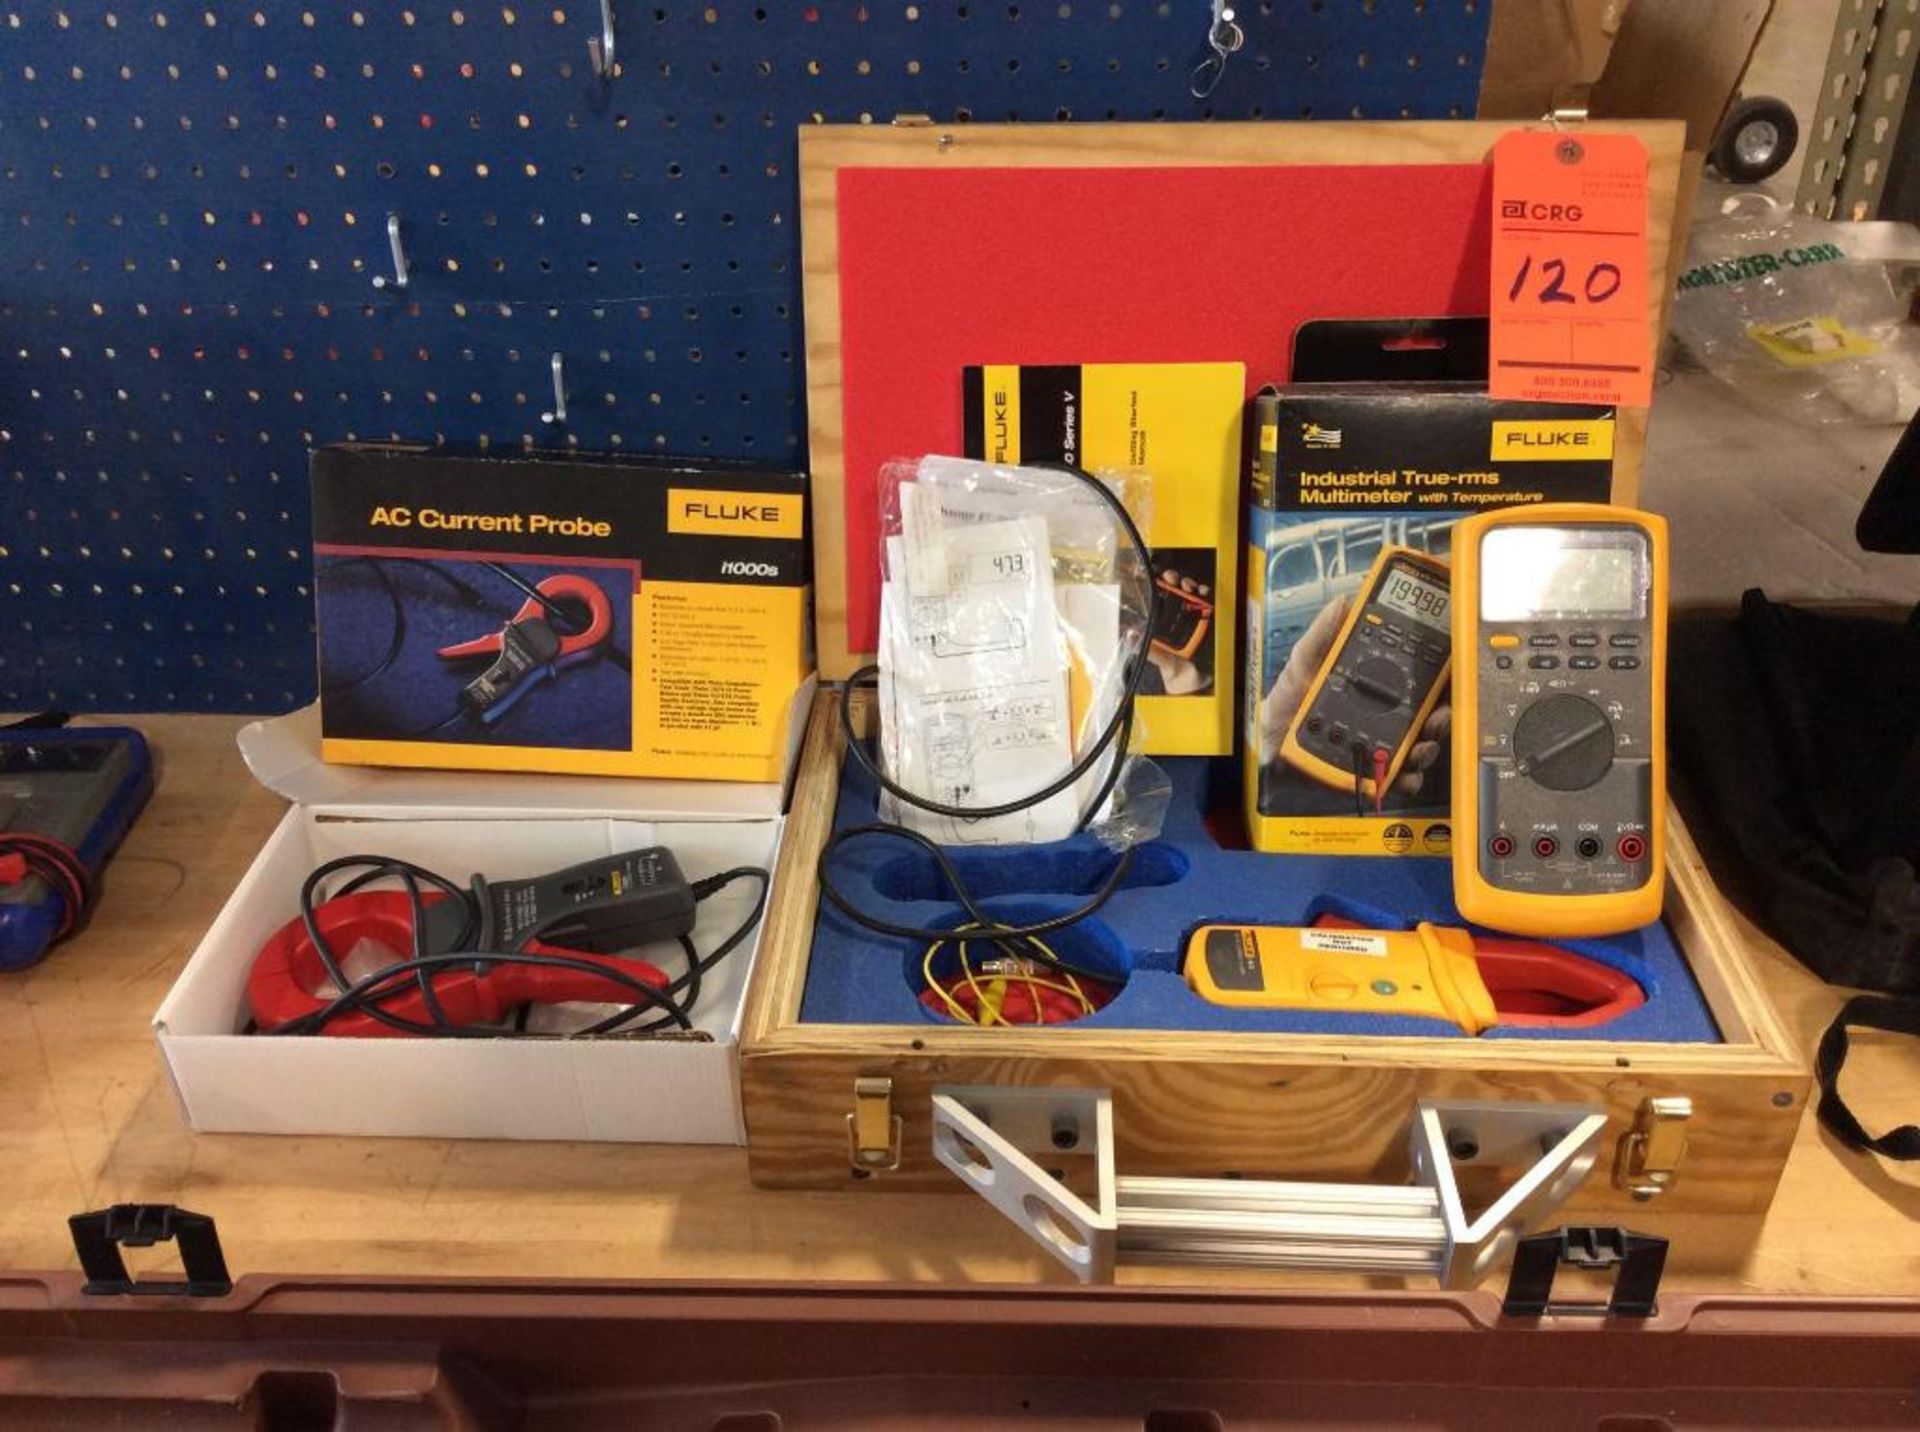 Fluke industrial true-rms multimeter with accessories and custom storage case